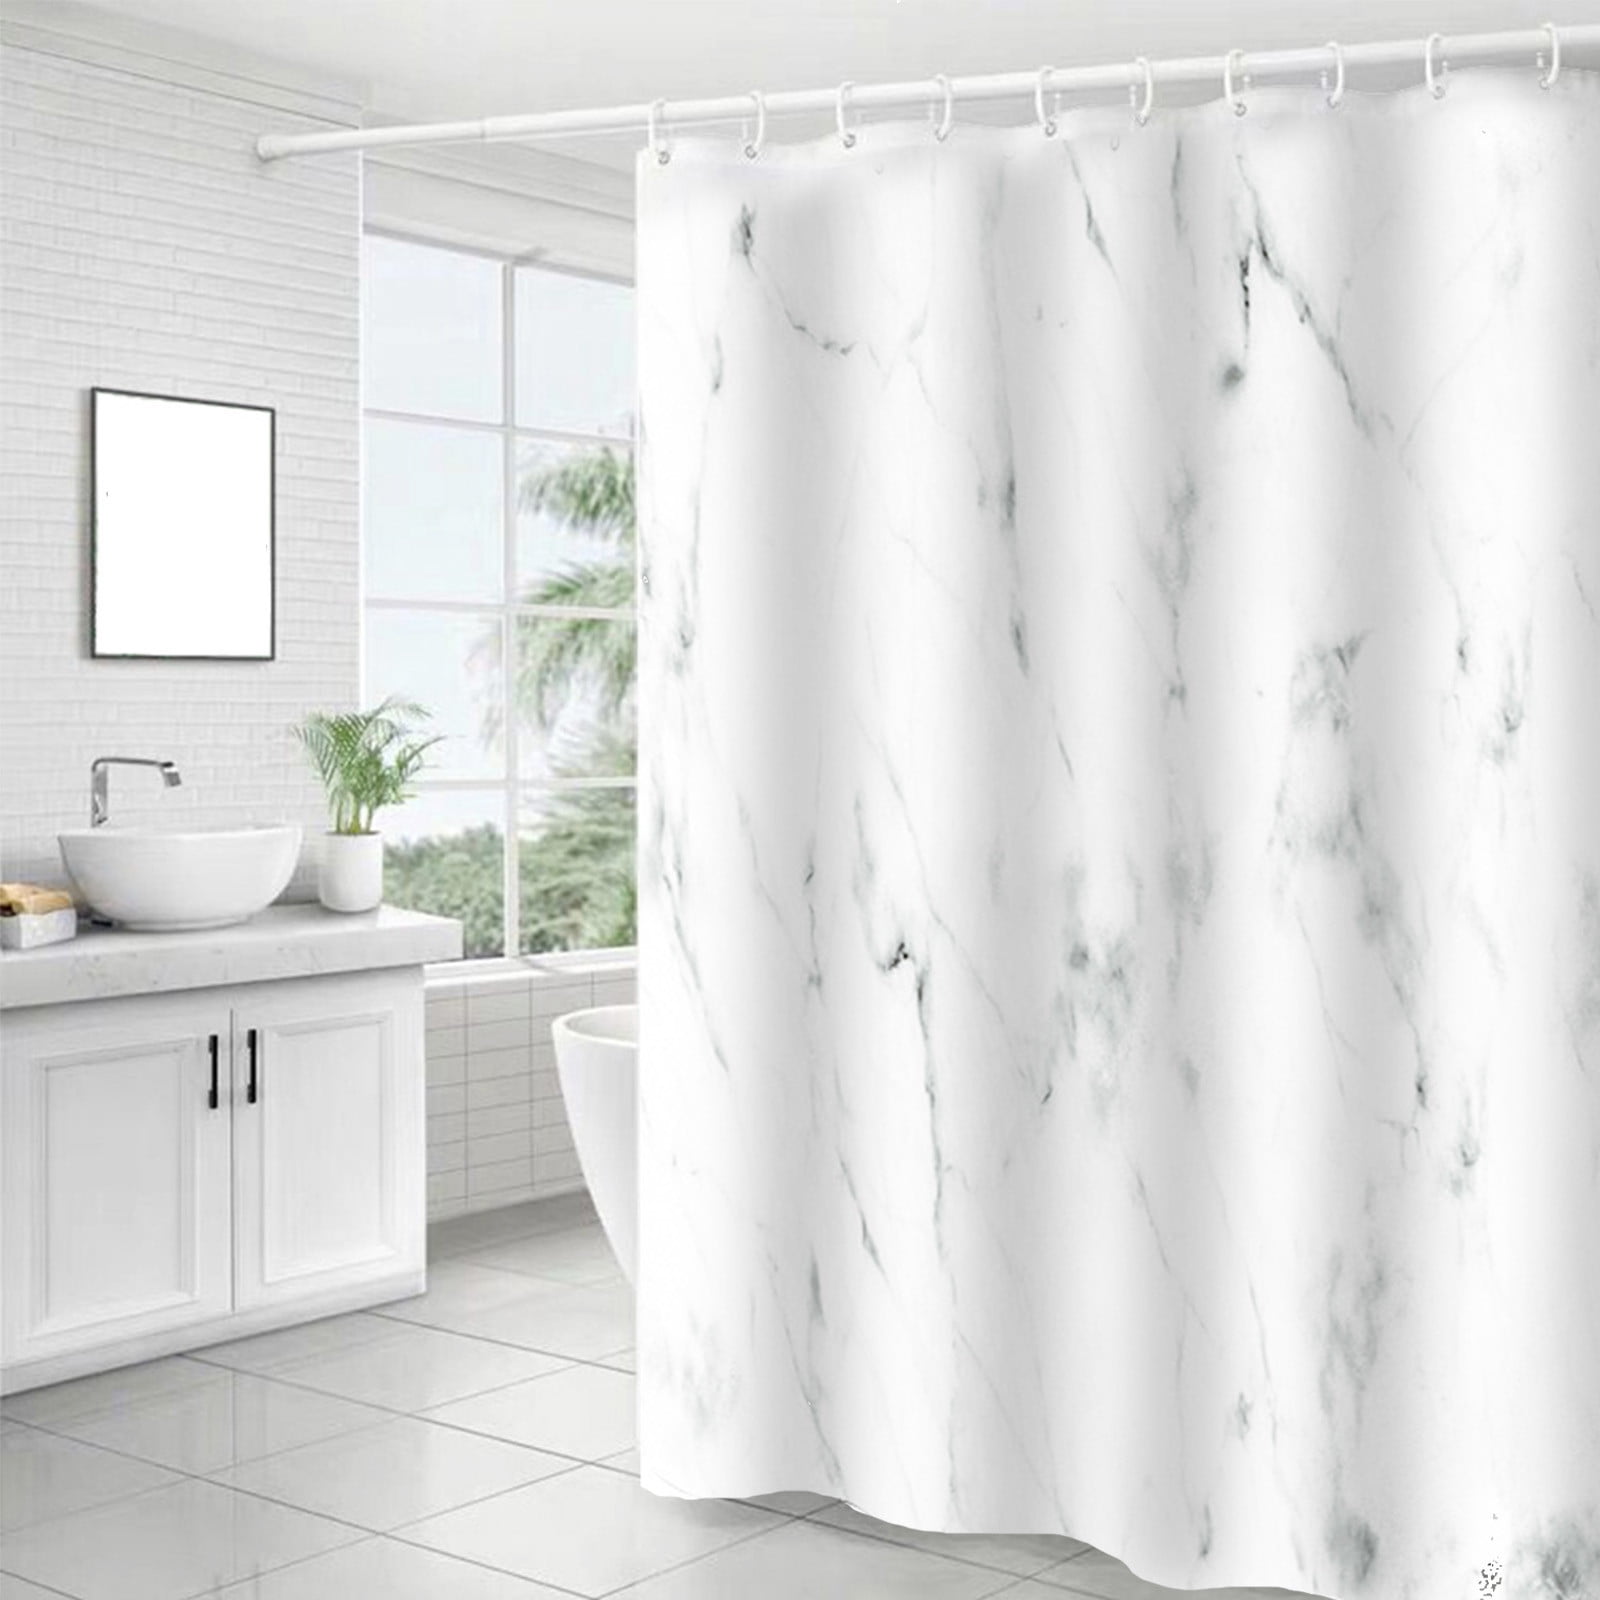 QISIWOLE Marble Bathroom Shower Curtain,Grey and White Fabric